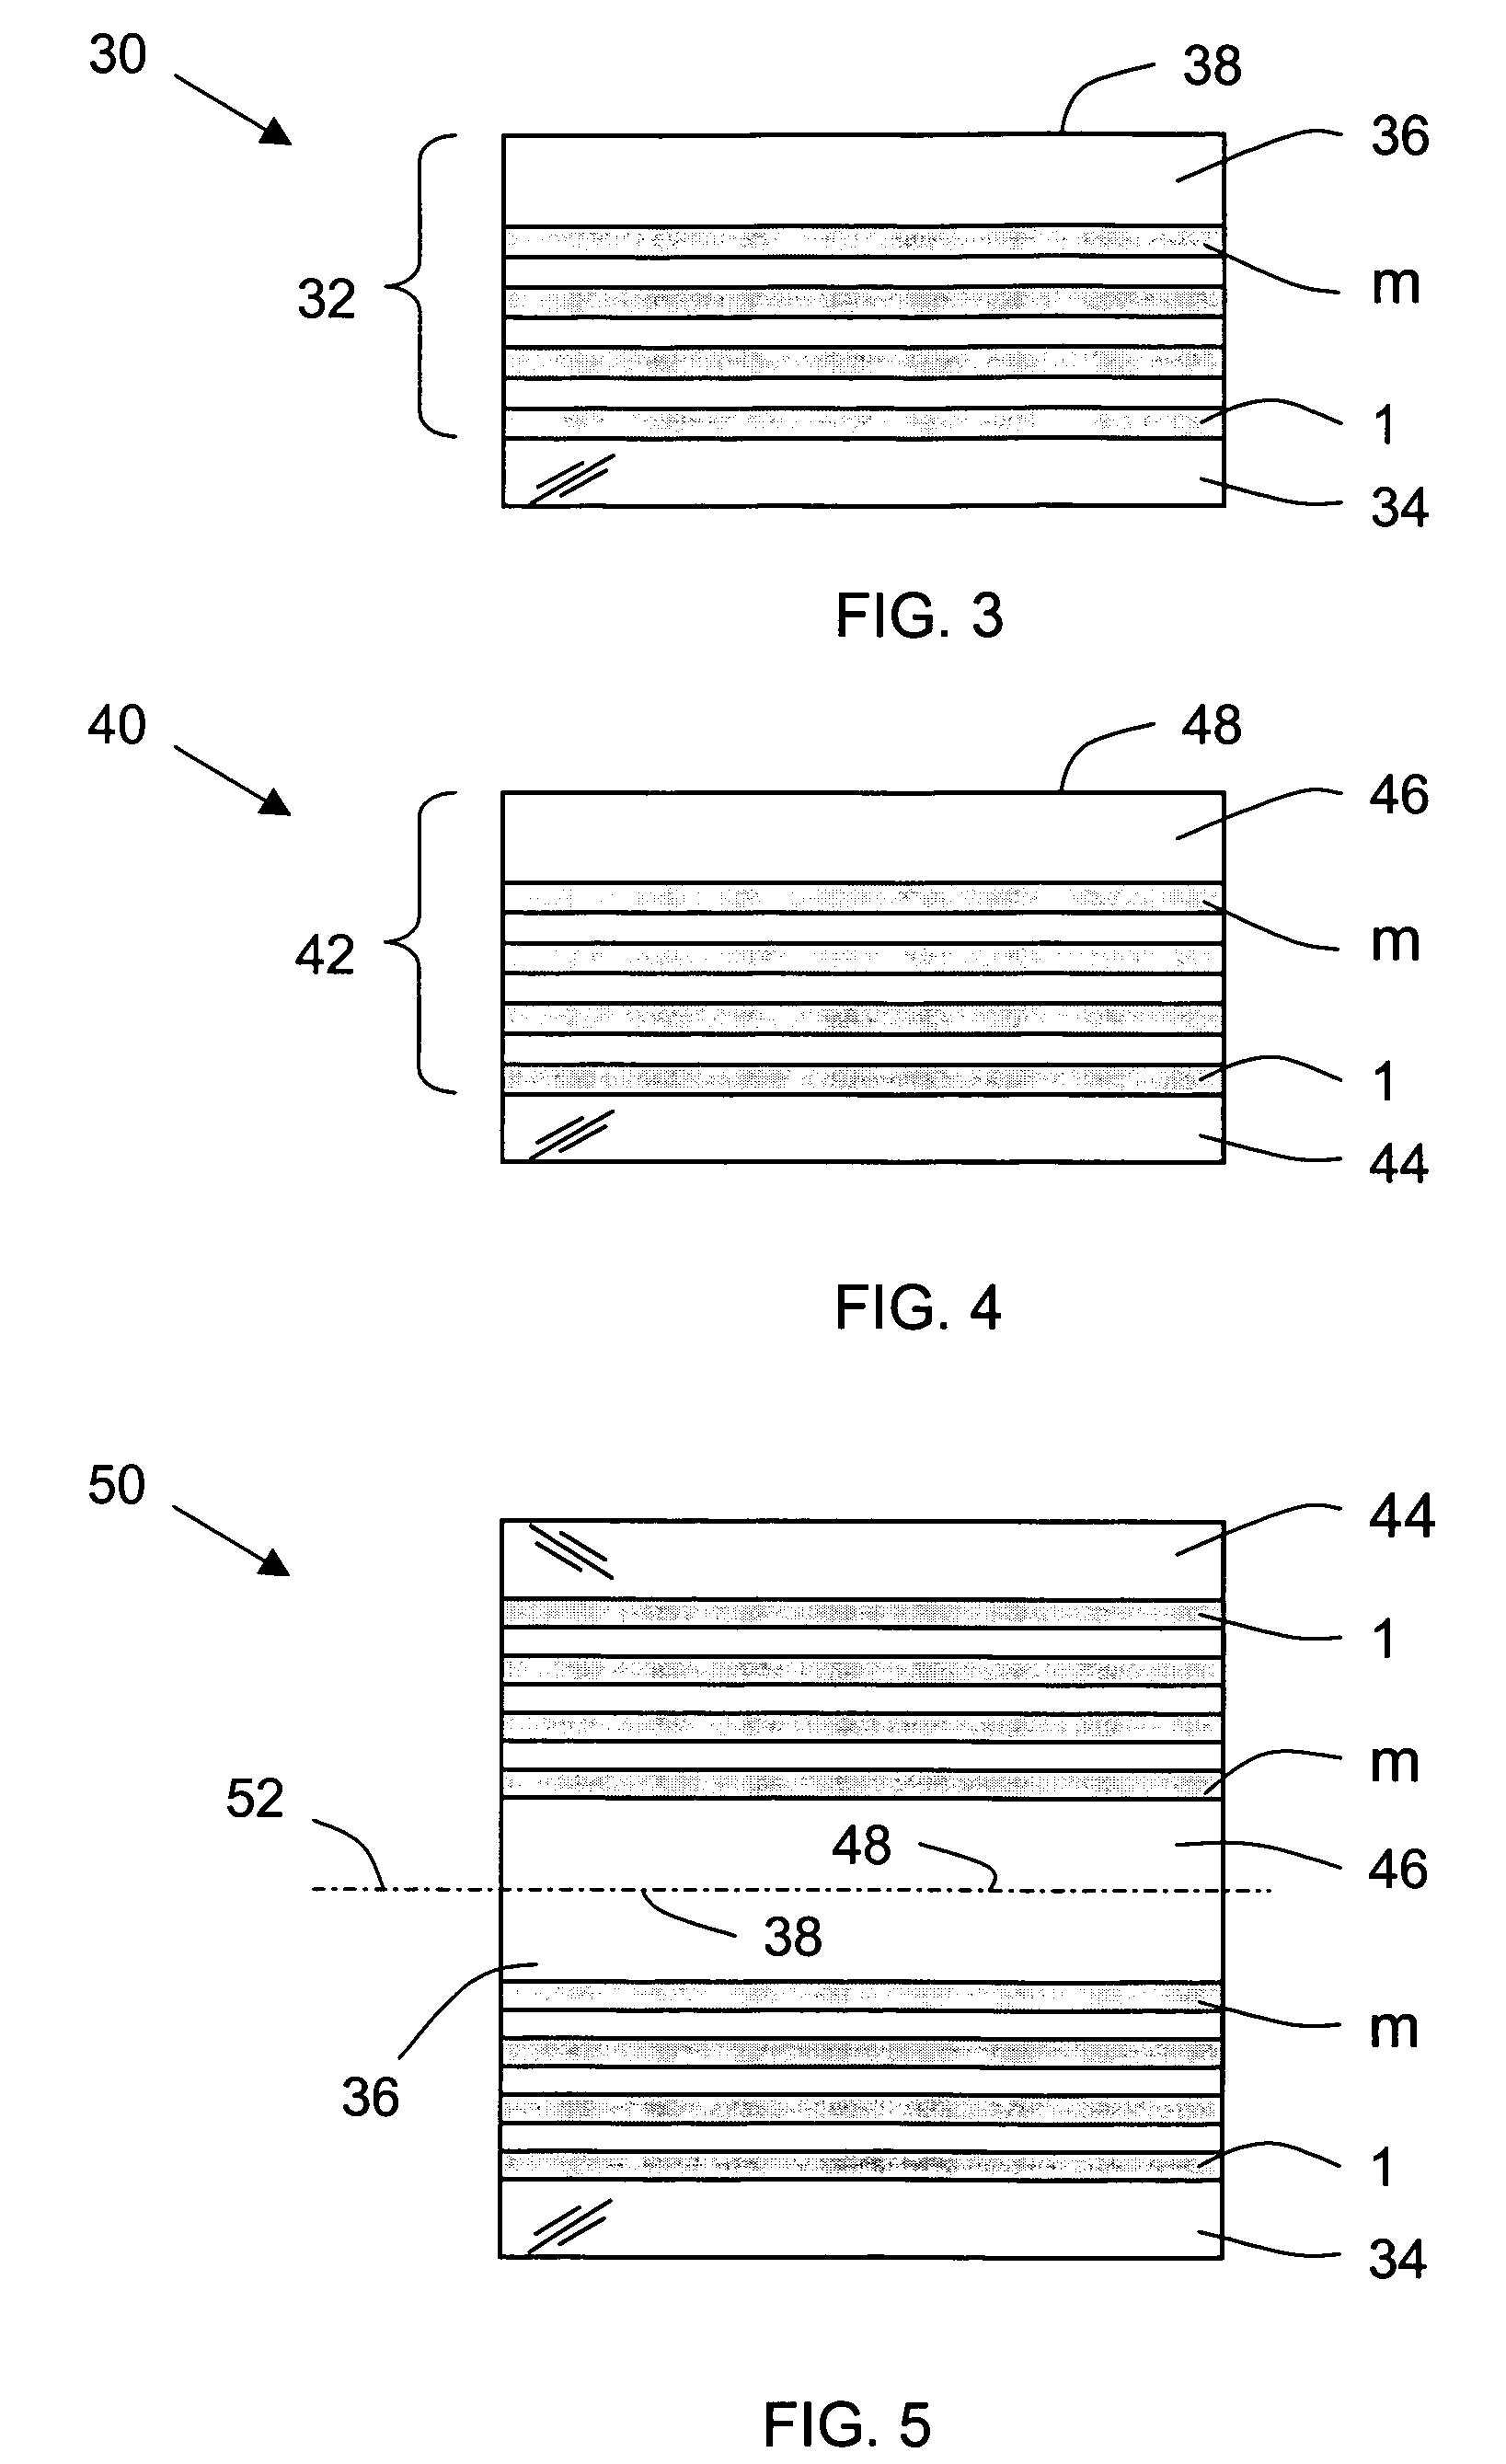 Fabrication of narrow-band thin-film optical filters